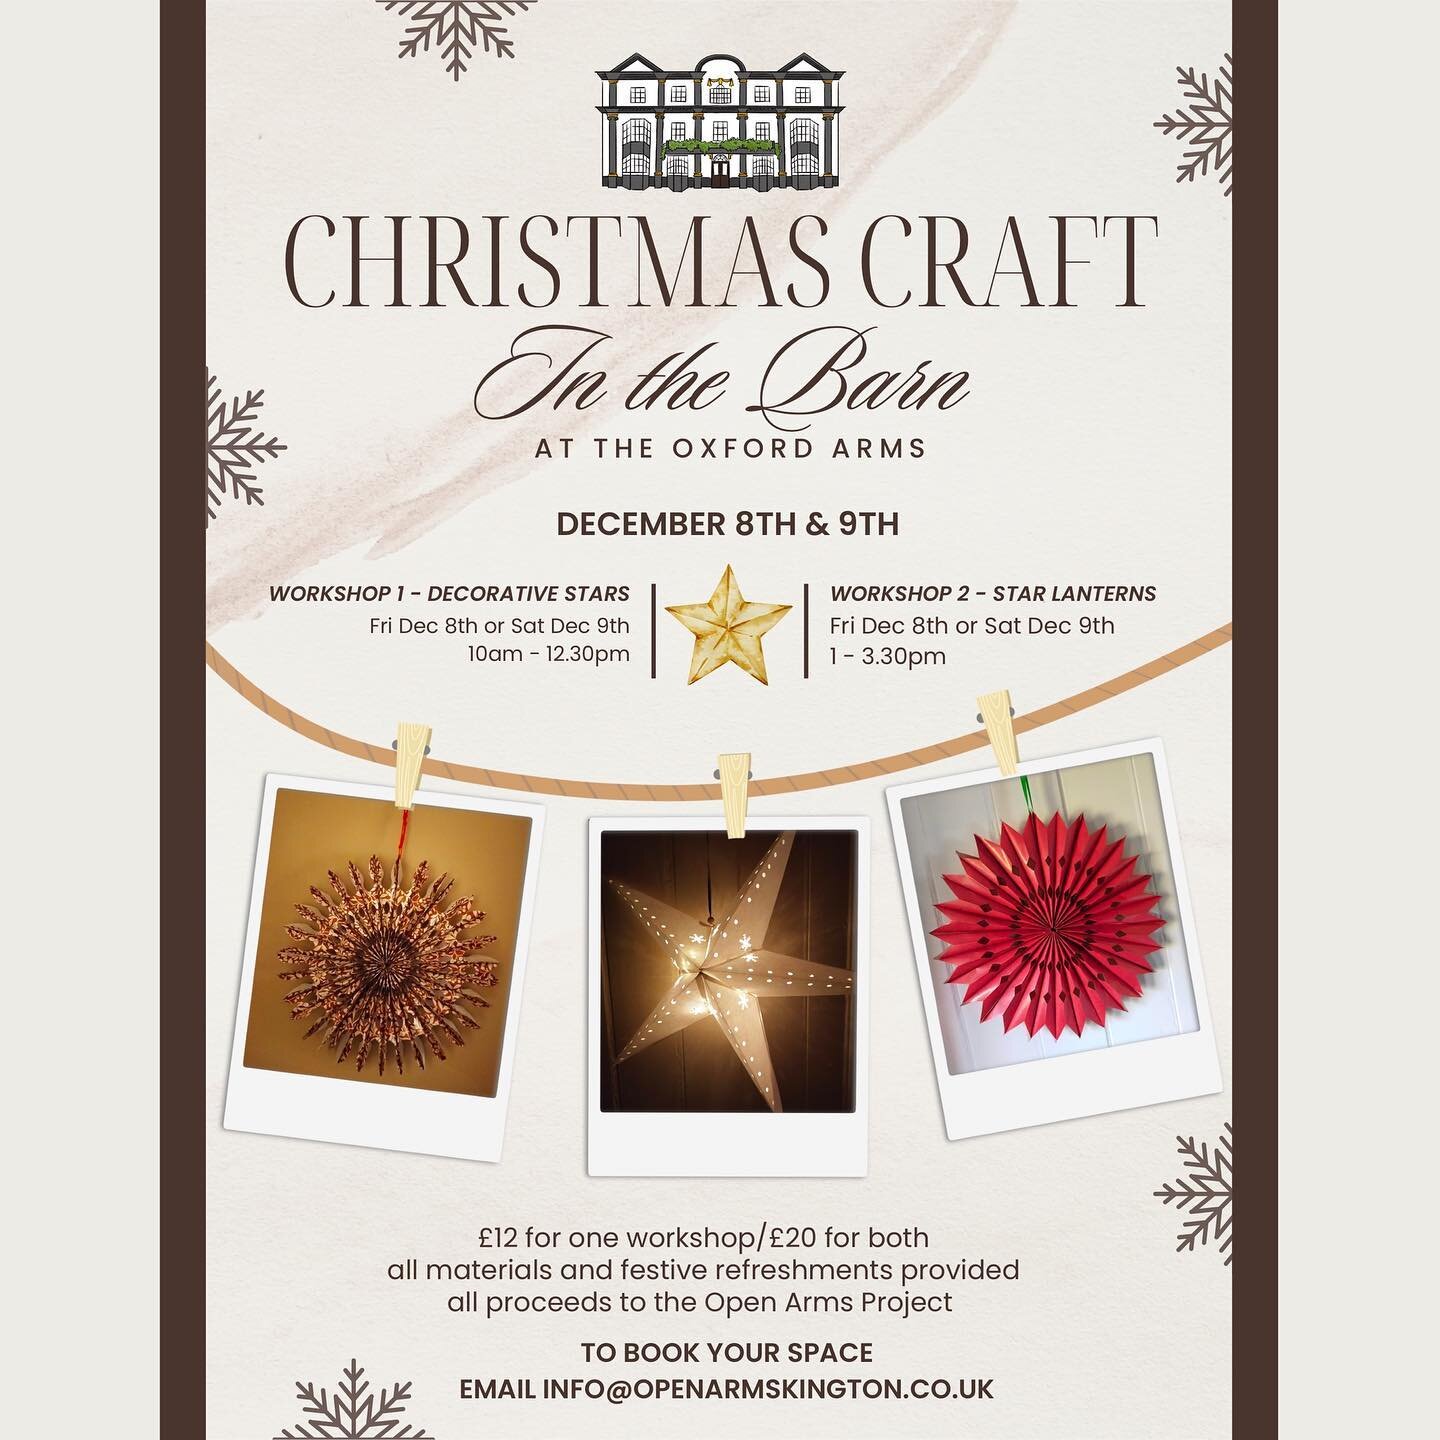 LAST CHANCE to book your slot for tomorrow and Saturdays Christmas Crafts in the Barn at the Oxford Arms!

#openarmskington #communityhub #communitypub #popupkitchen #supportlocal #welovekington #herefordshire #kingtonherefordshire #ruralherefordshir